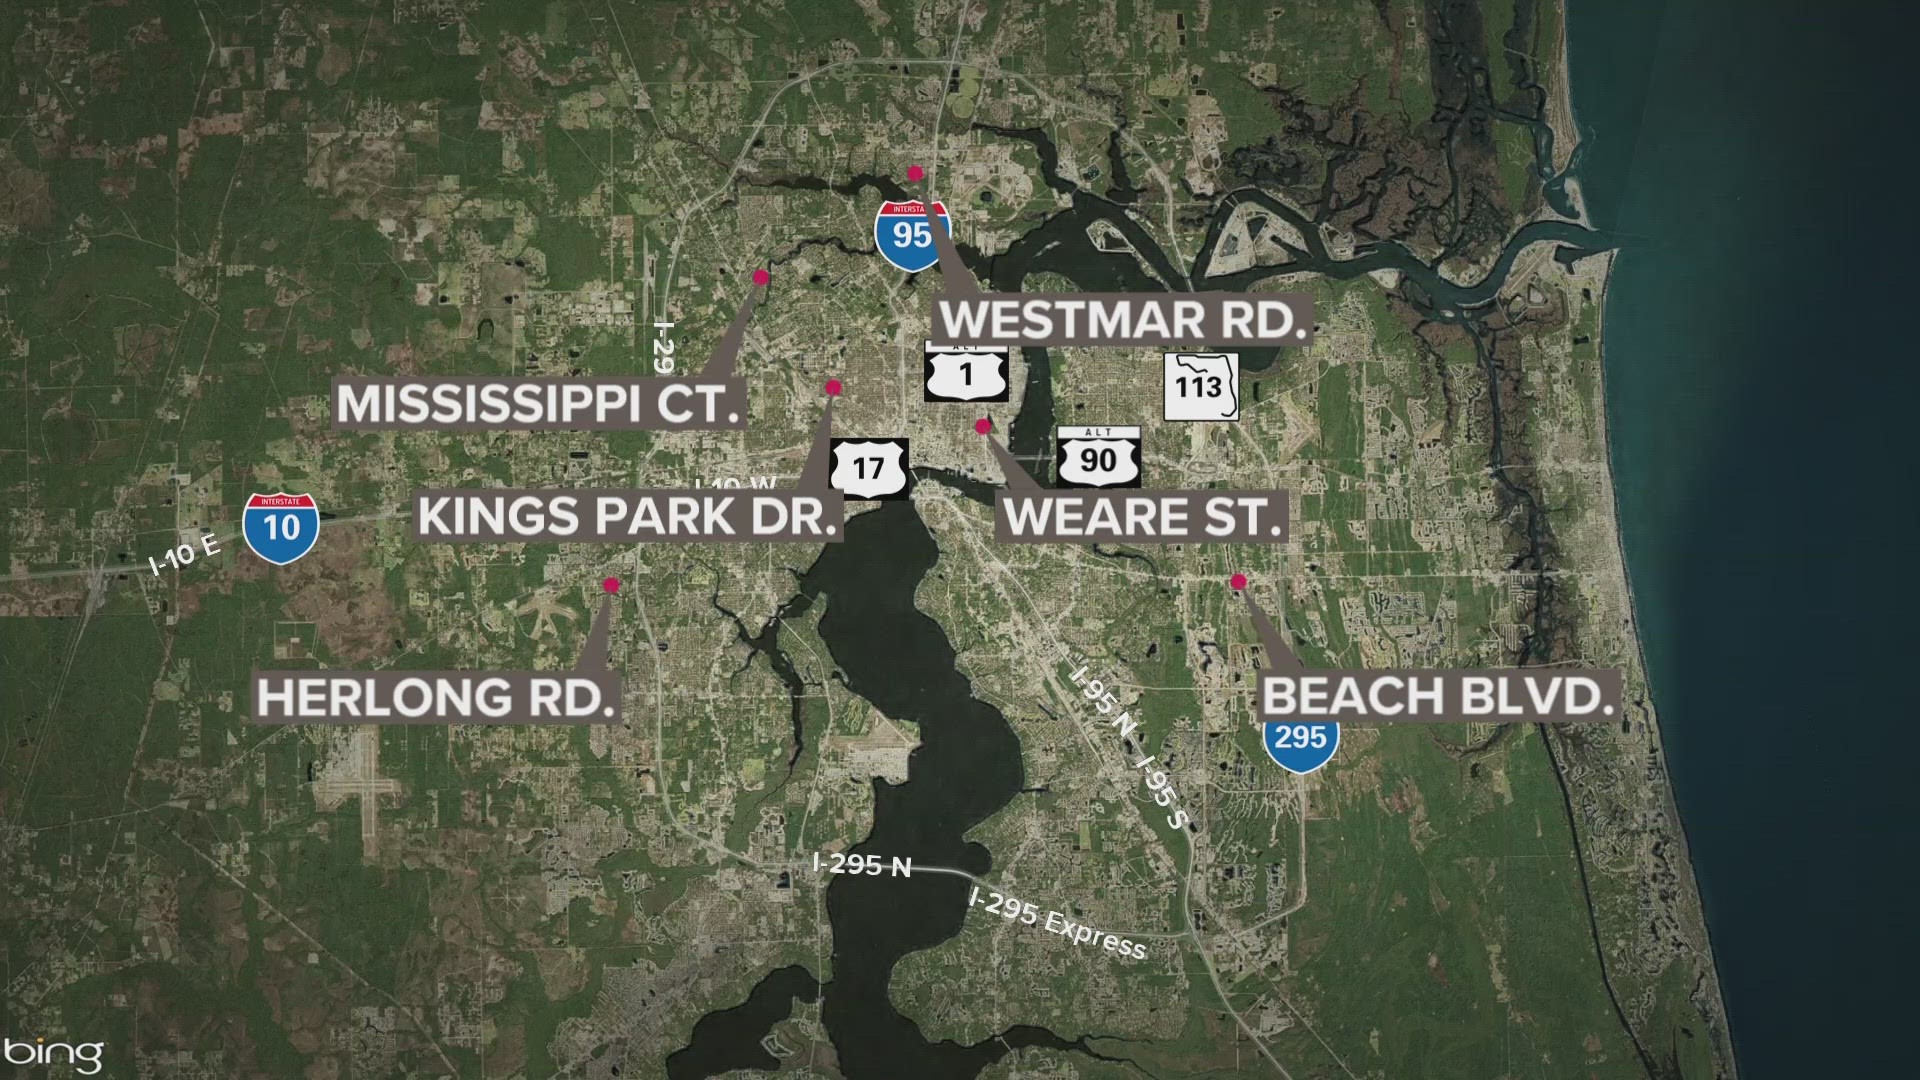 The Jacksonville Sheriff's Office is looking for the people responsible for half a dozen shootings across the city that have happened in the last two days.